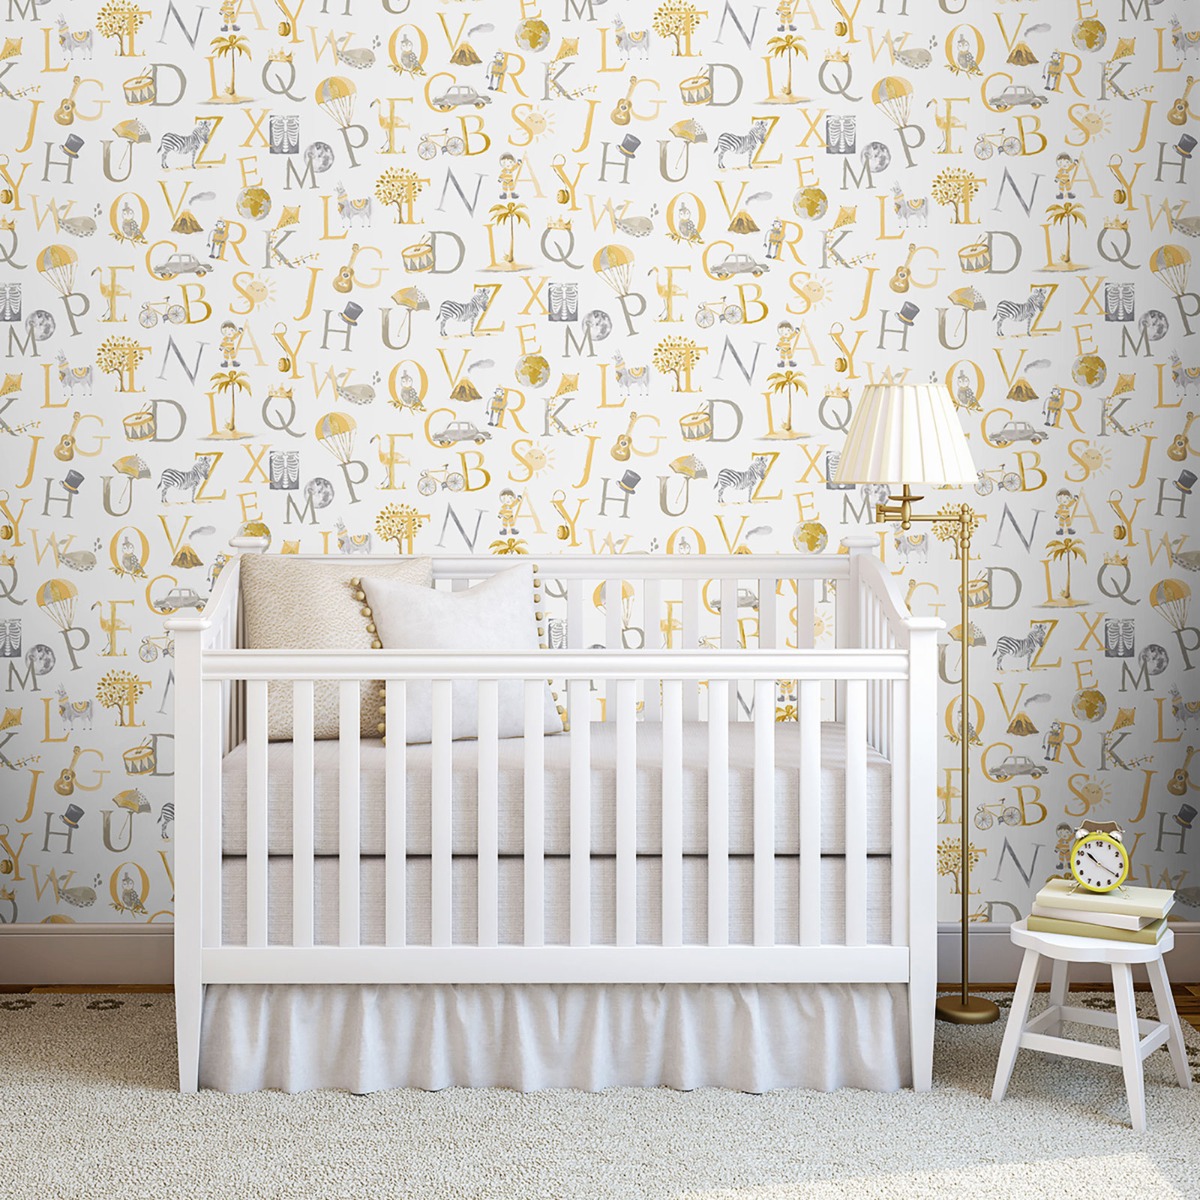 Gender Neutral Nursery Fabric Wallpaper and Home Decor  Spoonflower